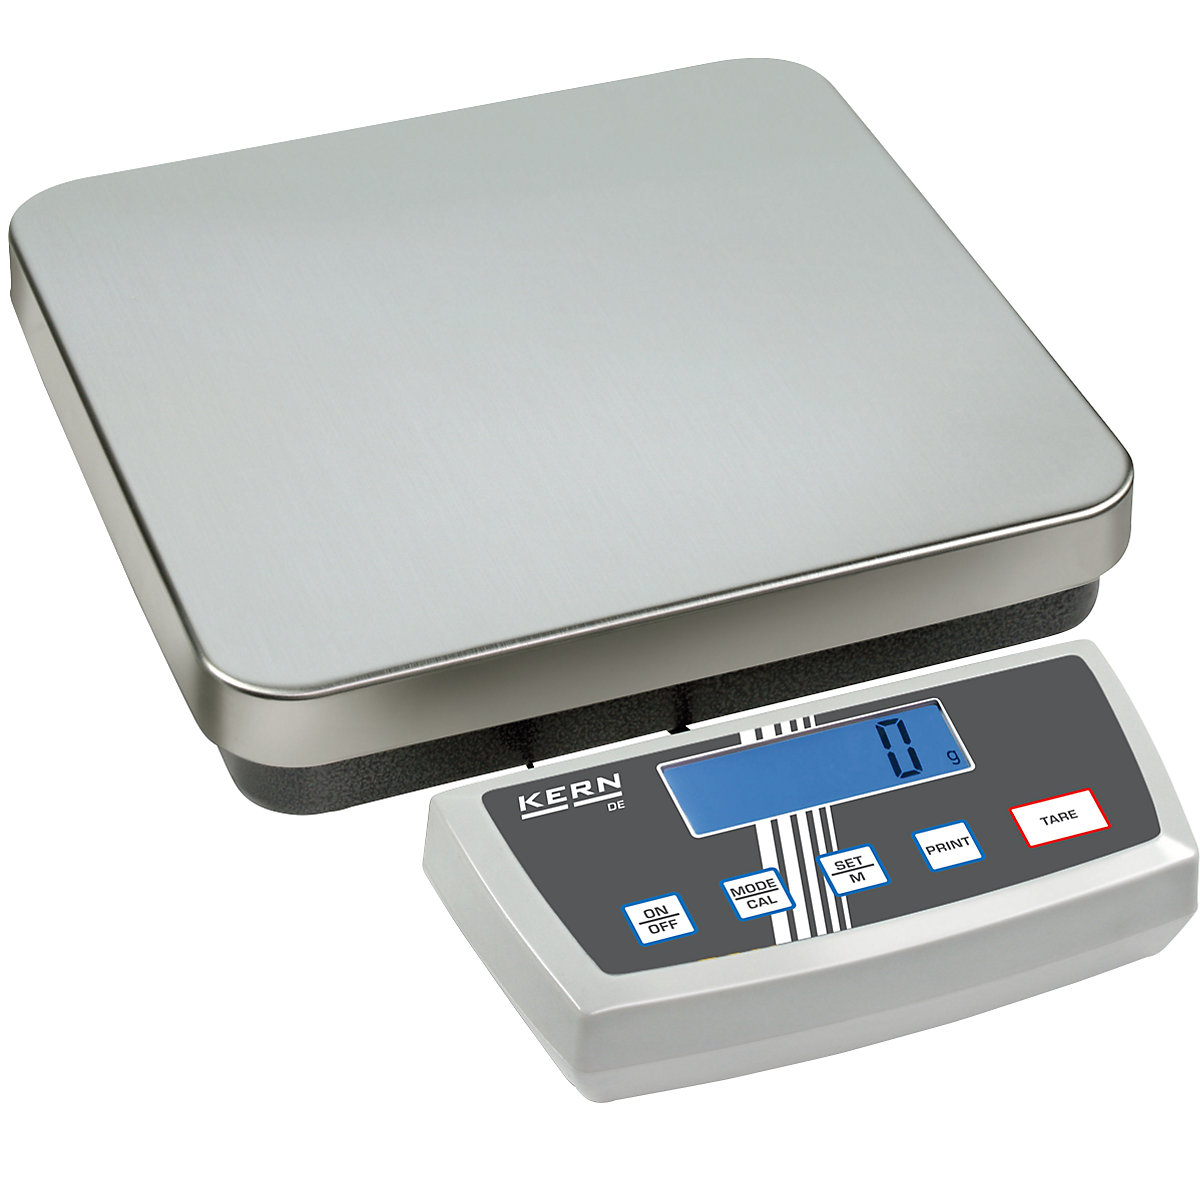 Platform scales – KERN, dual range scales, weighing range up to 6 kg, read-out accuracy 1 / 2 g, weighing plate 318 x 308 mm-2